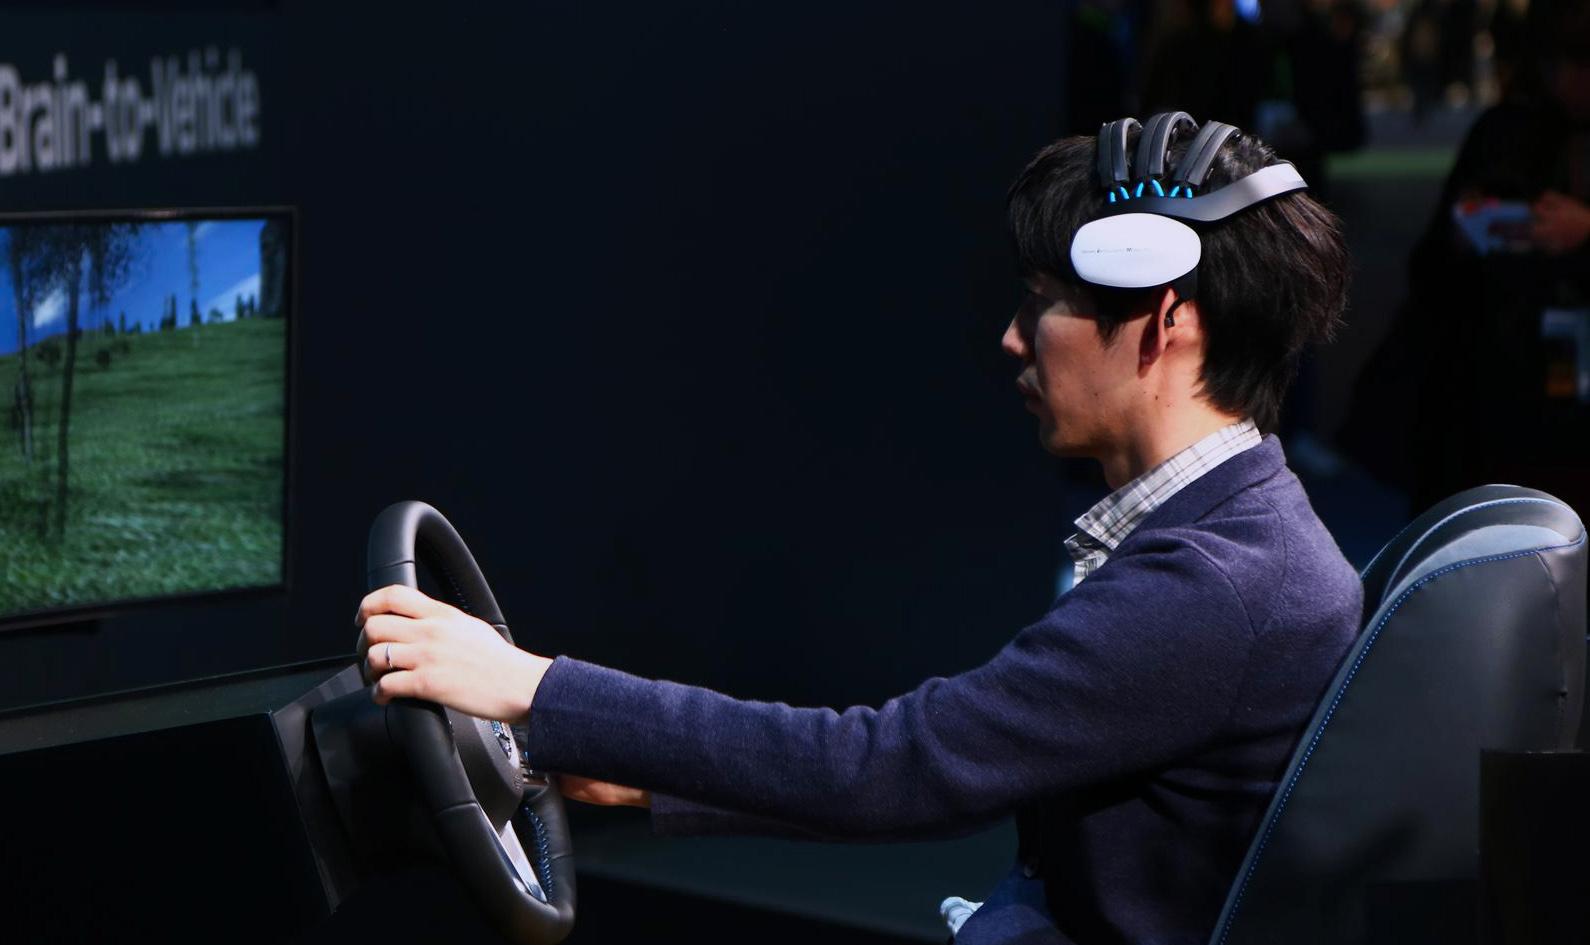 Nissan’s Brain-to-Vehicle technology communicates our brains with vehicles